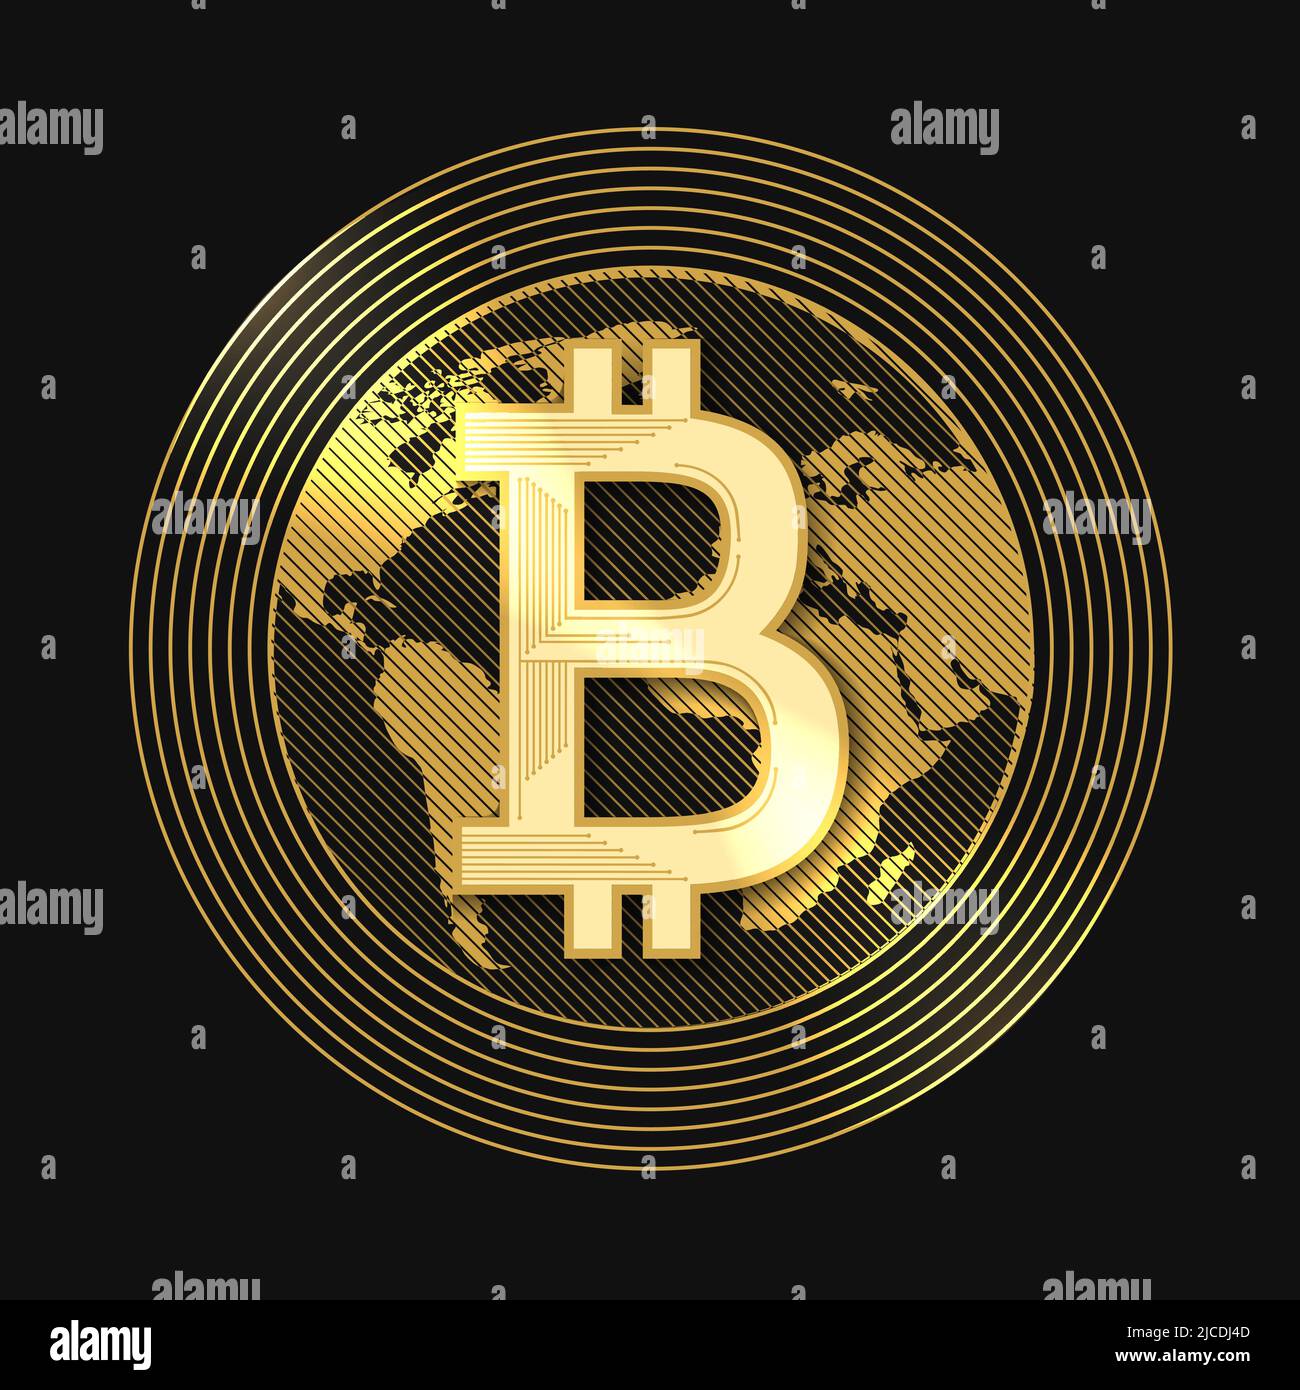 Golden Bitcoin Isolated on Black Backround. Digital Crypto currency symbol. Vector Illustration. Stock Vector